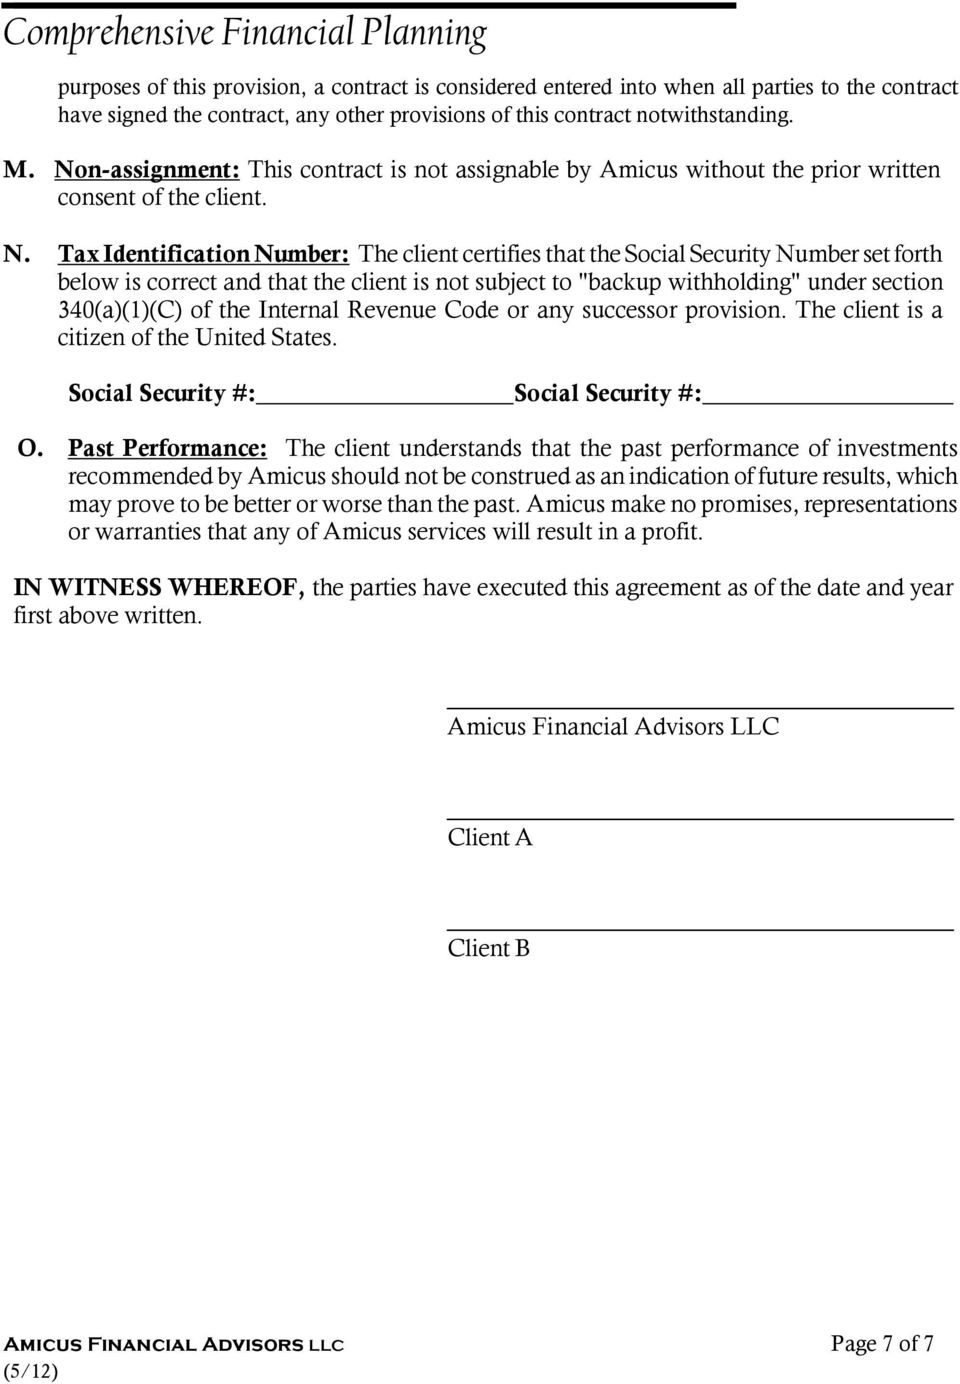 Tax Identification Number: The client certifies that the Social Security Number set forth below is correct and that the client is not subject to "backup withholding" under section 340(a)(1)(C) of the